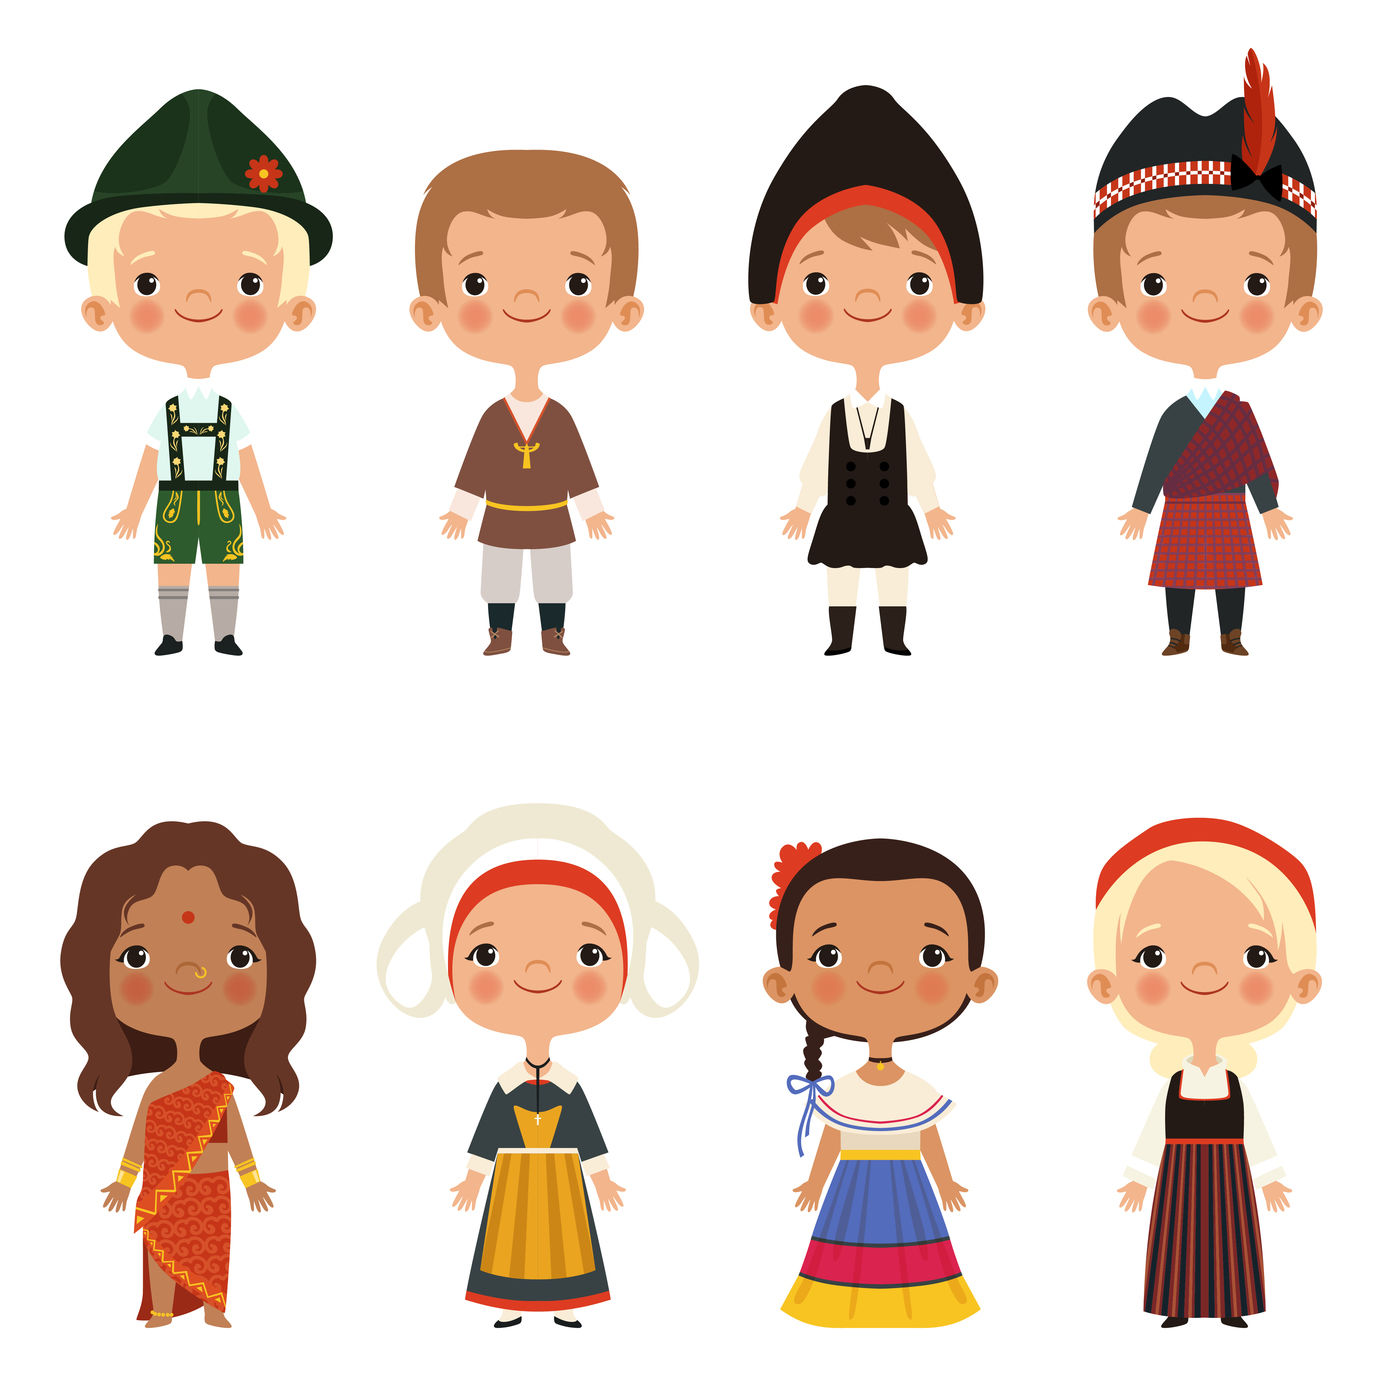 Kids of different nationalities By ONYX | TheHungryJPEG